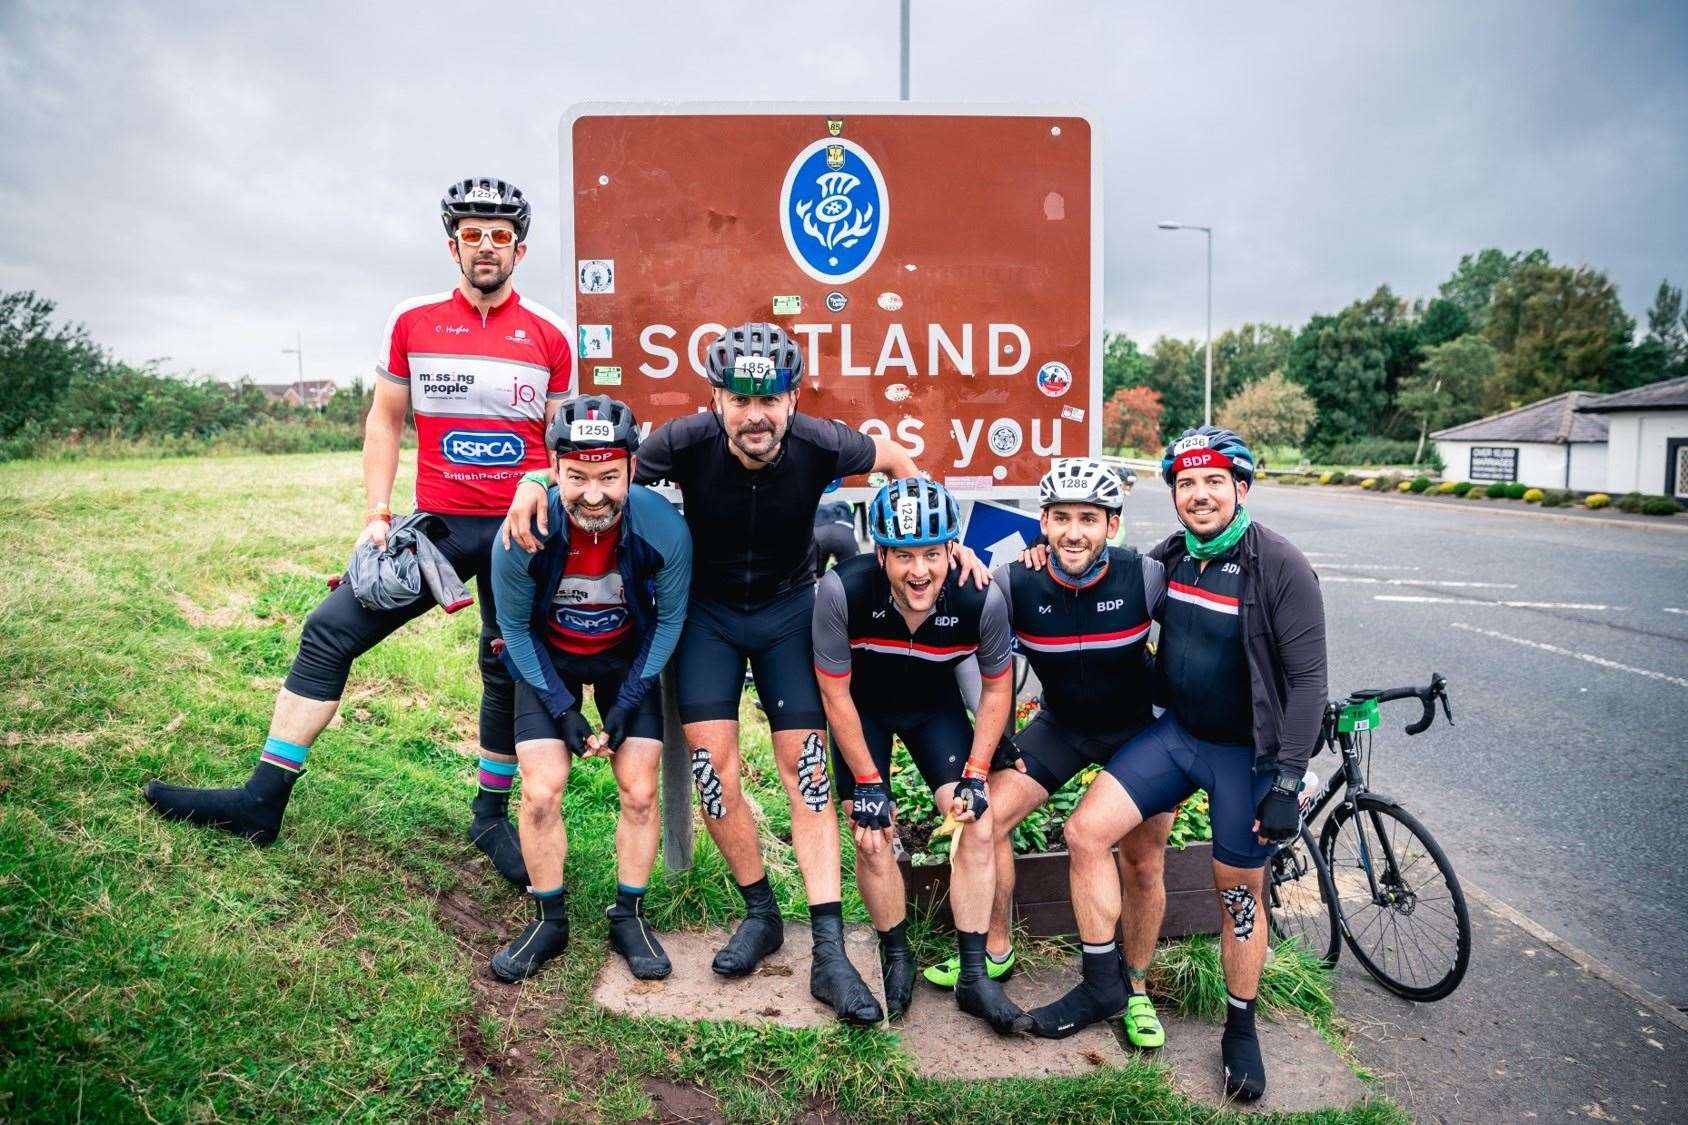 Some of the Deloitte cyclists arriving in Scotland on Thursday. Picture Threshold Sports